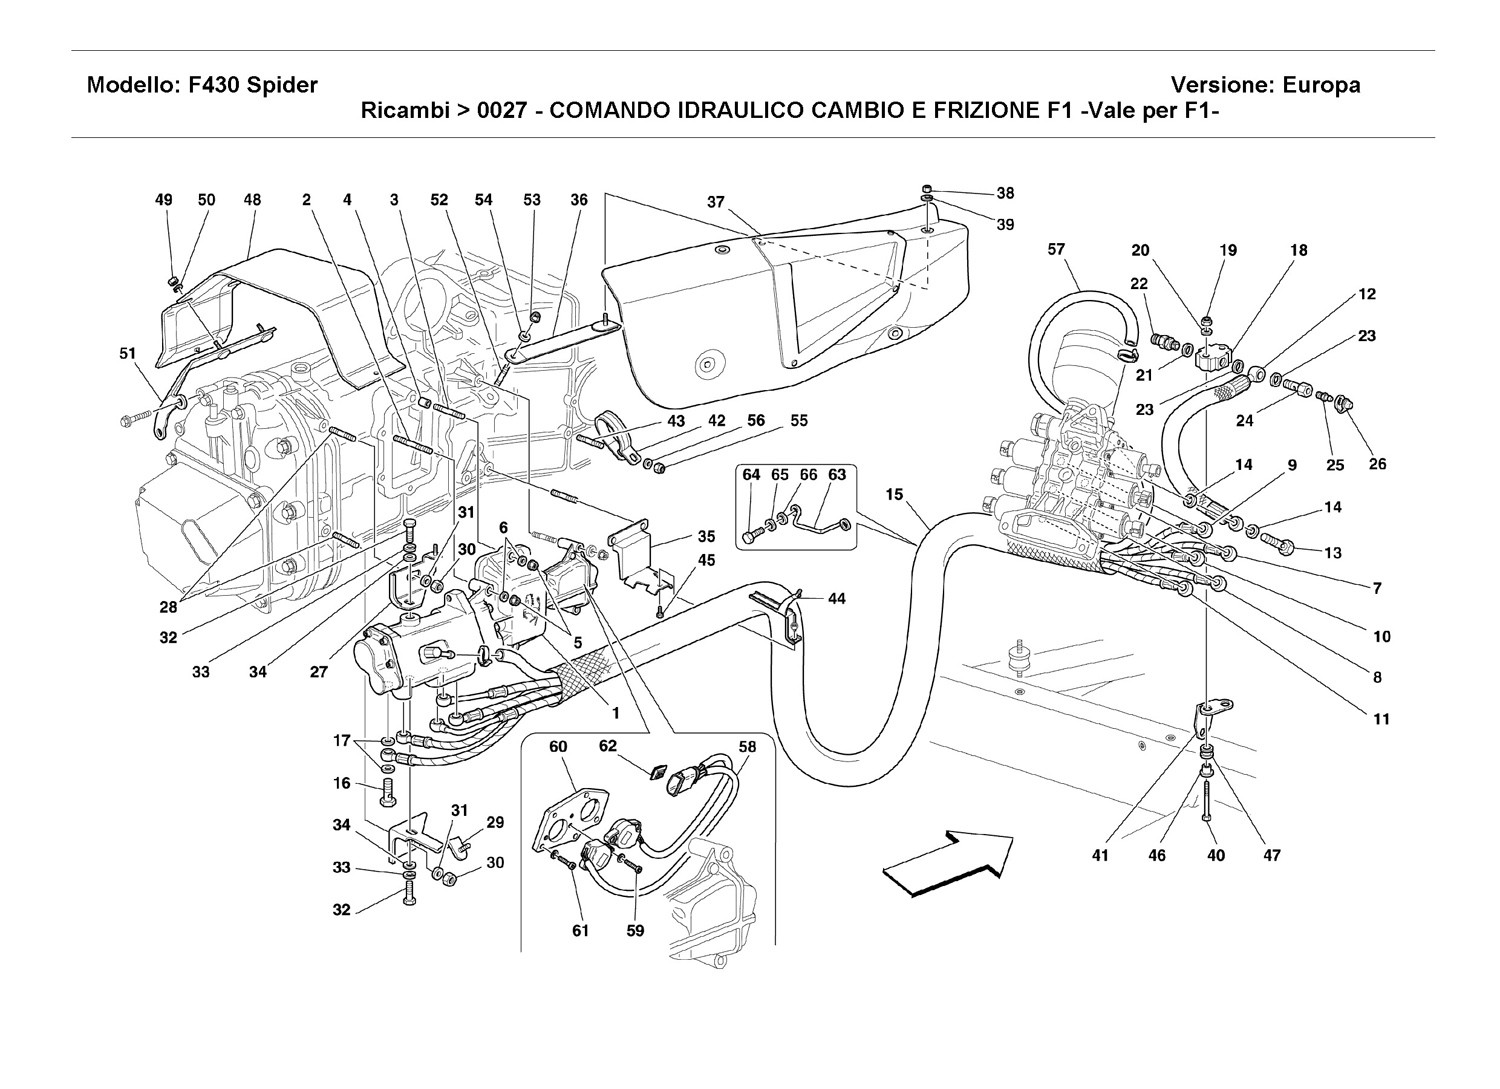 F1 CLUTCH AND GEARBOX HYDRAULIC CONTROL -Valid for F1-